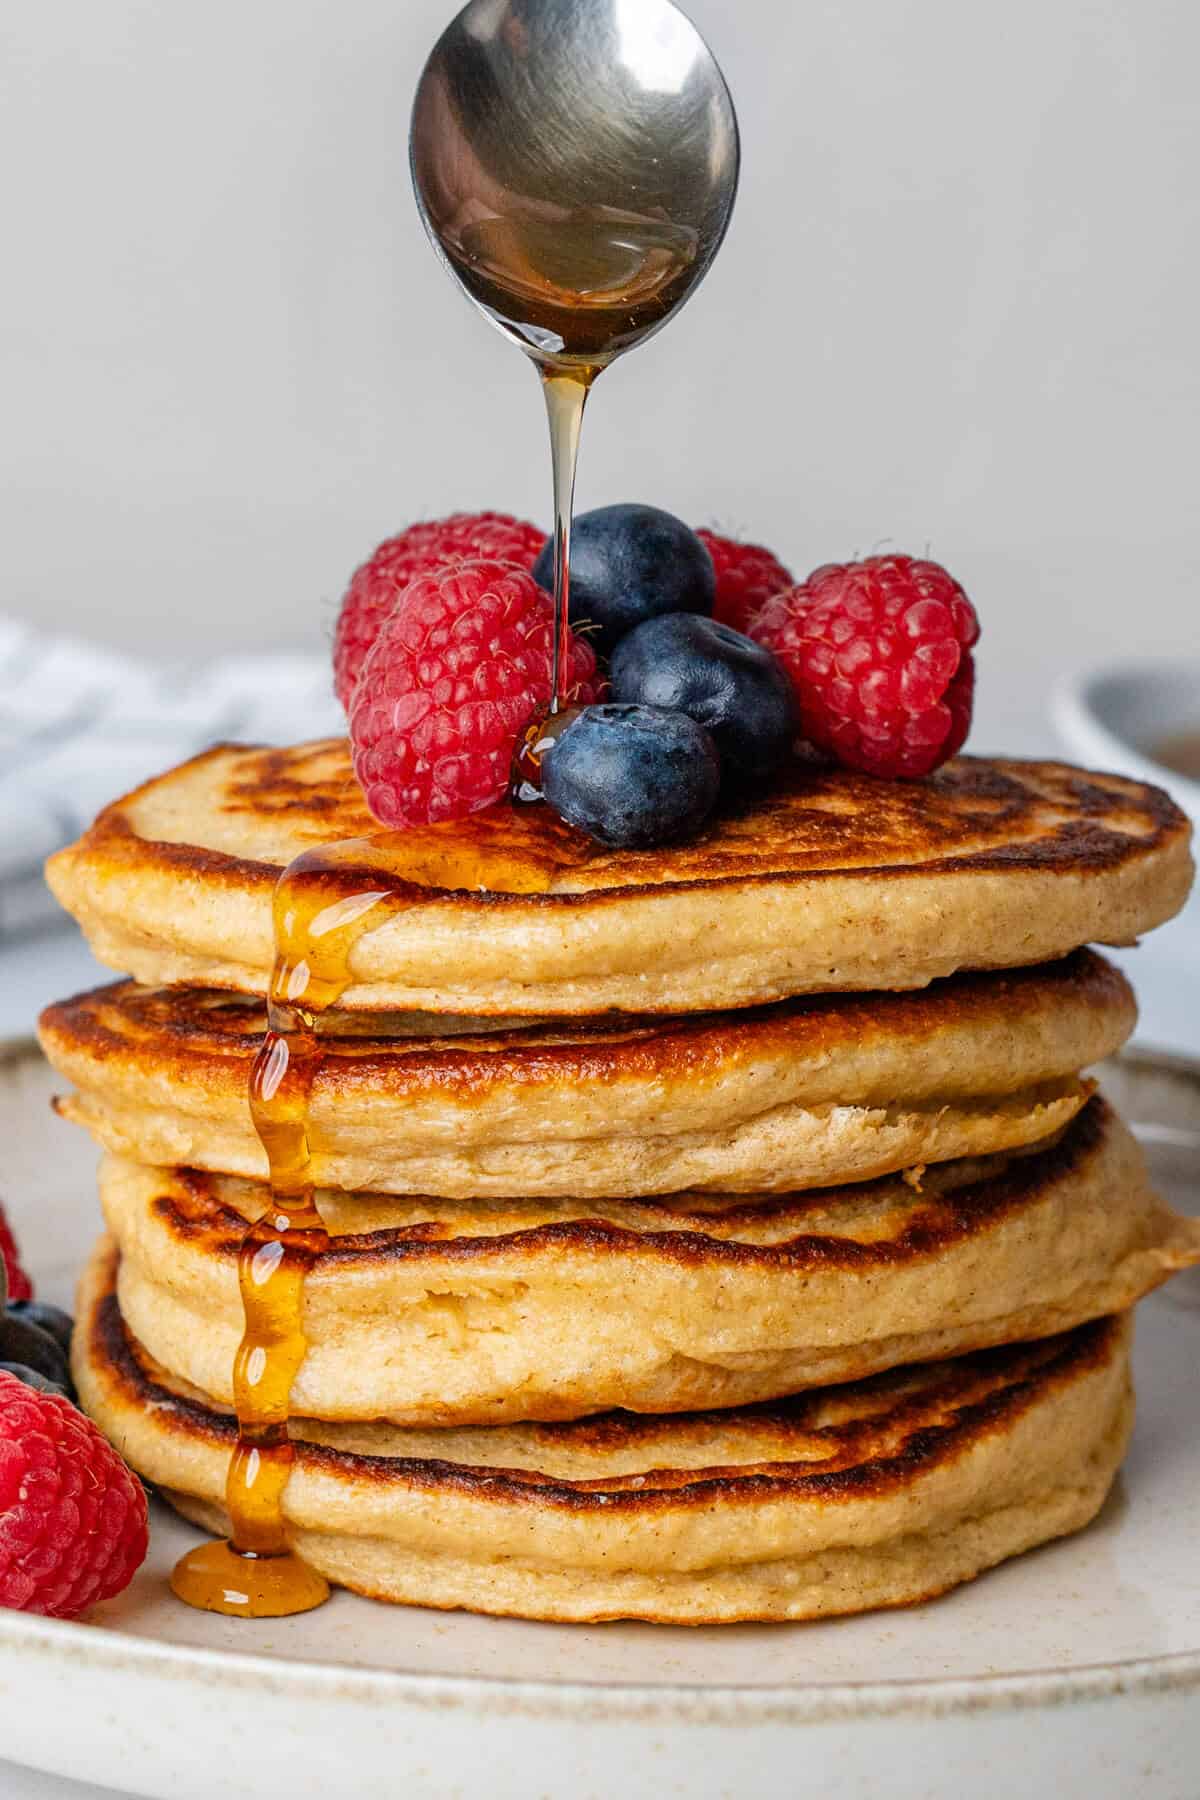 Maple syrup being poured over a stack of Greek yogurt pancakes